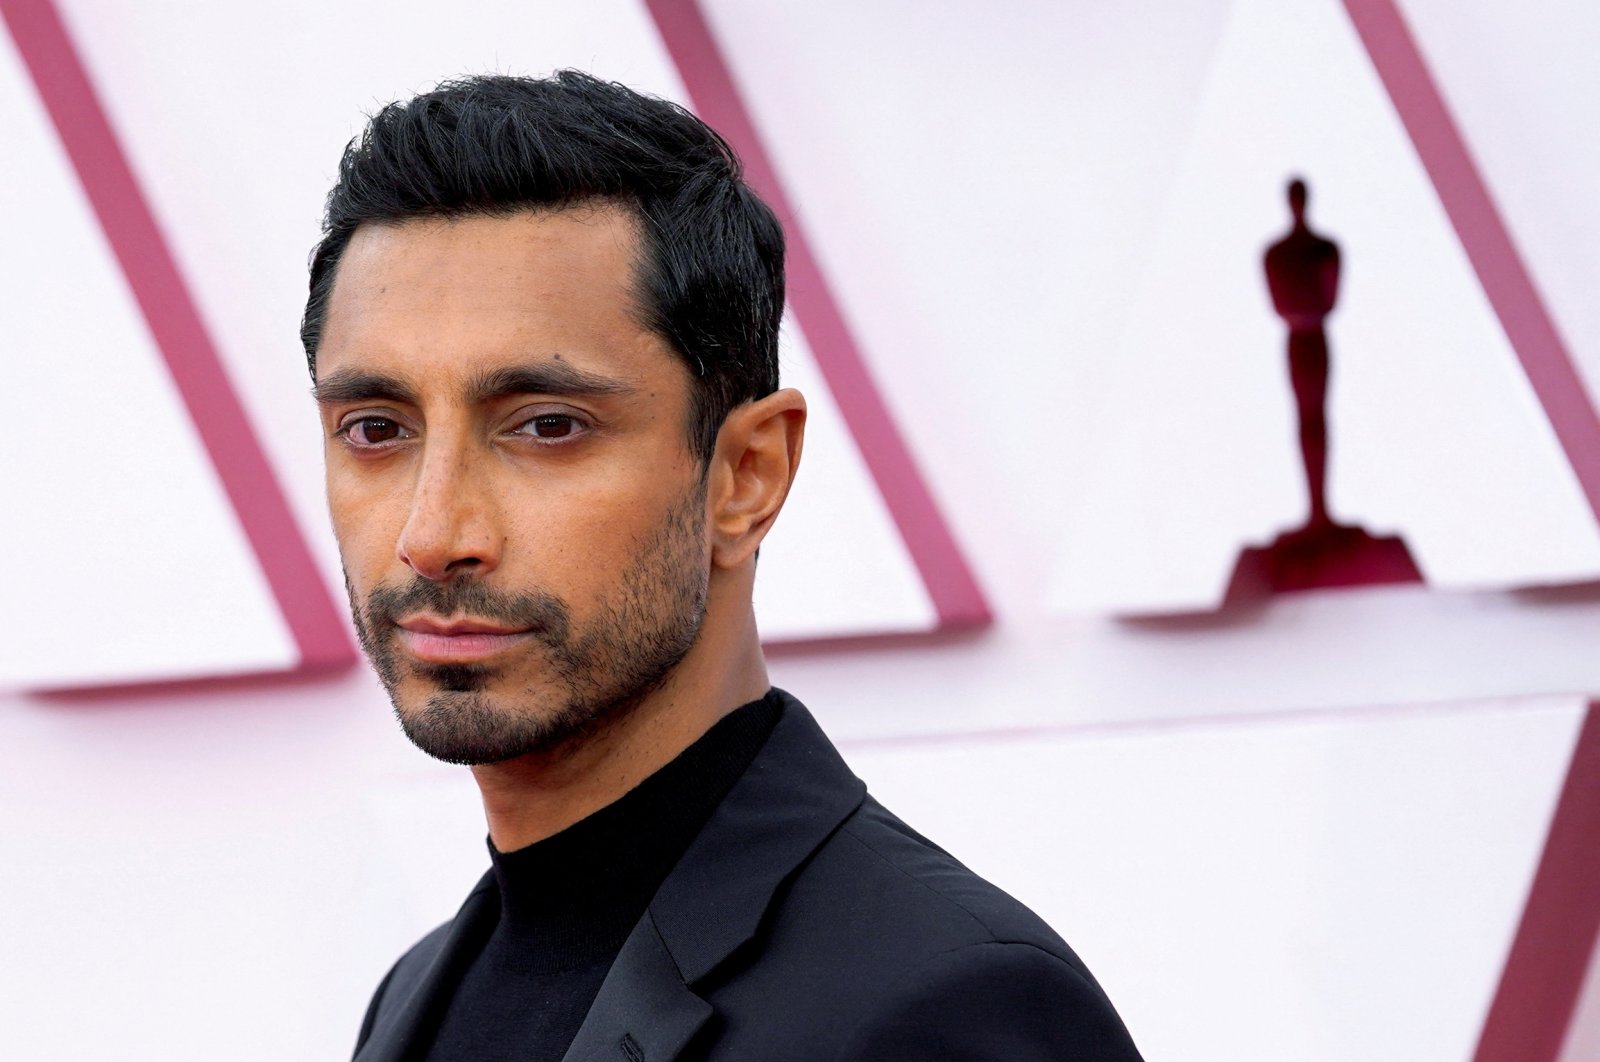 Riz Ahmed arrives at the Oscars red carpet for the 93rd Academy Awards in Los Angeles, California, U.S., April 25, 2021. (Reuters Photo)